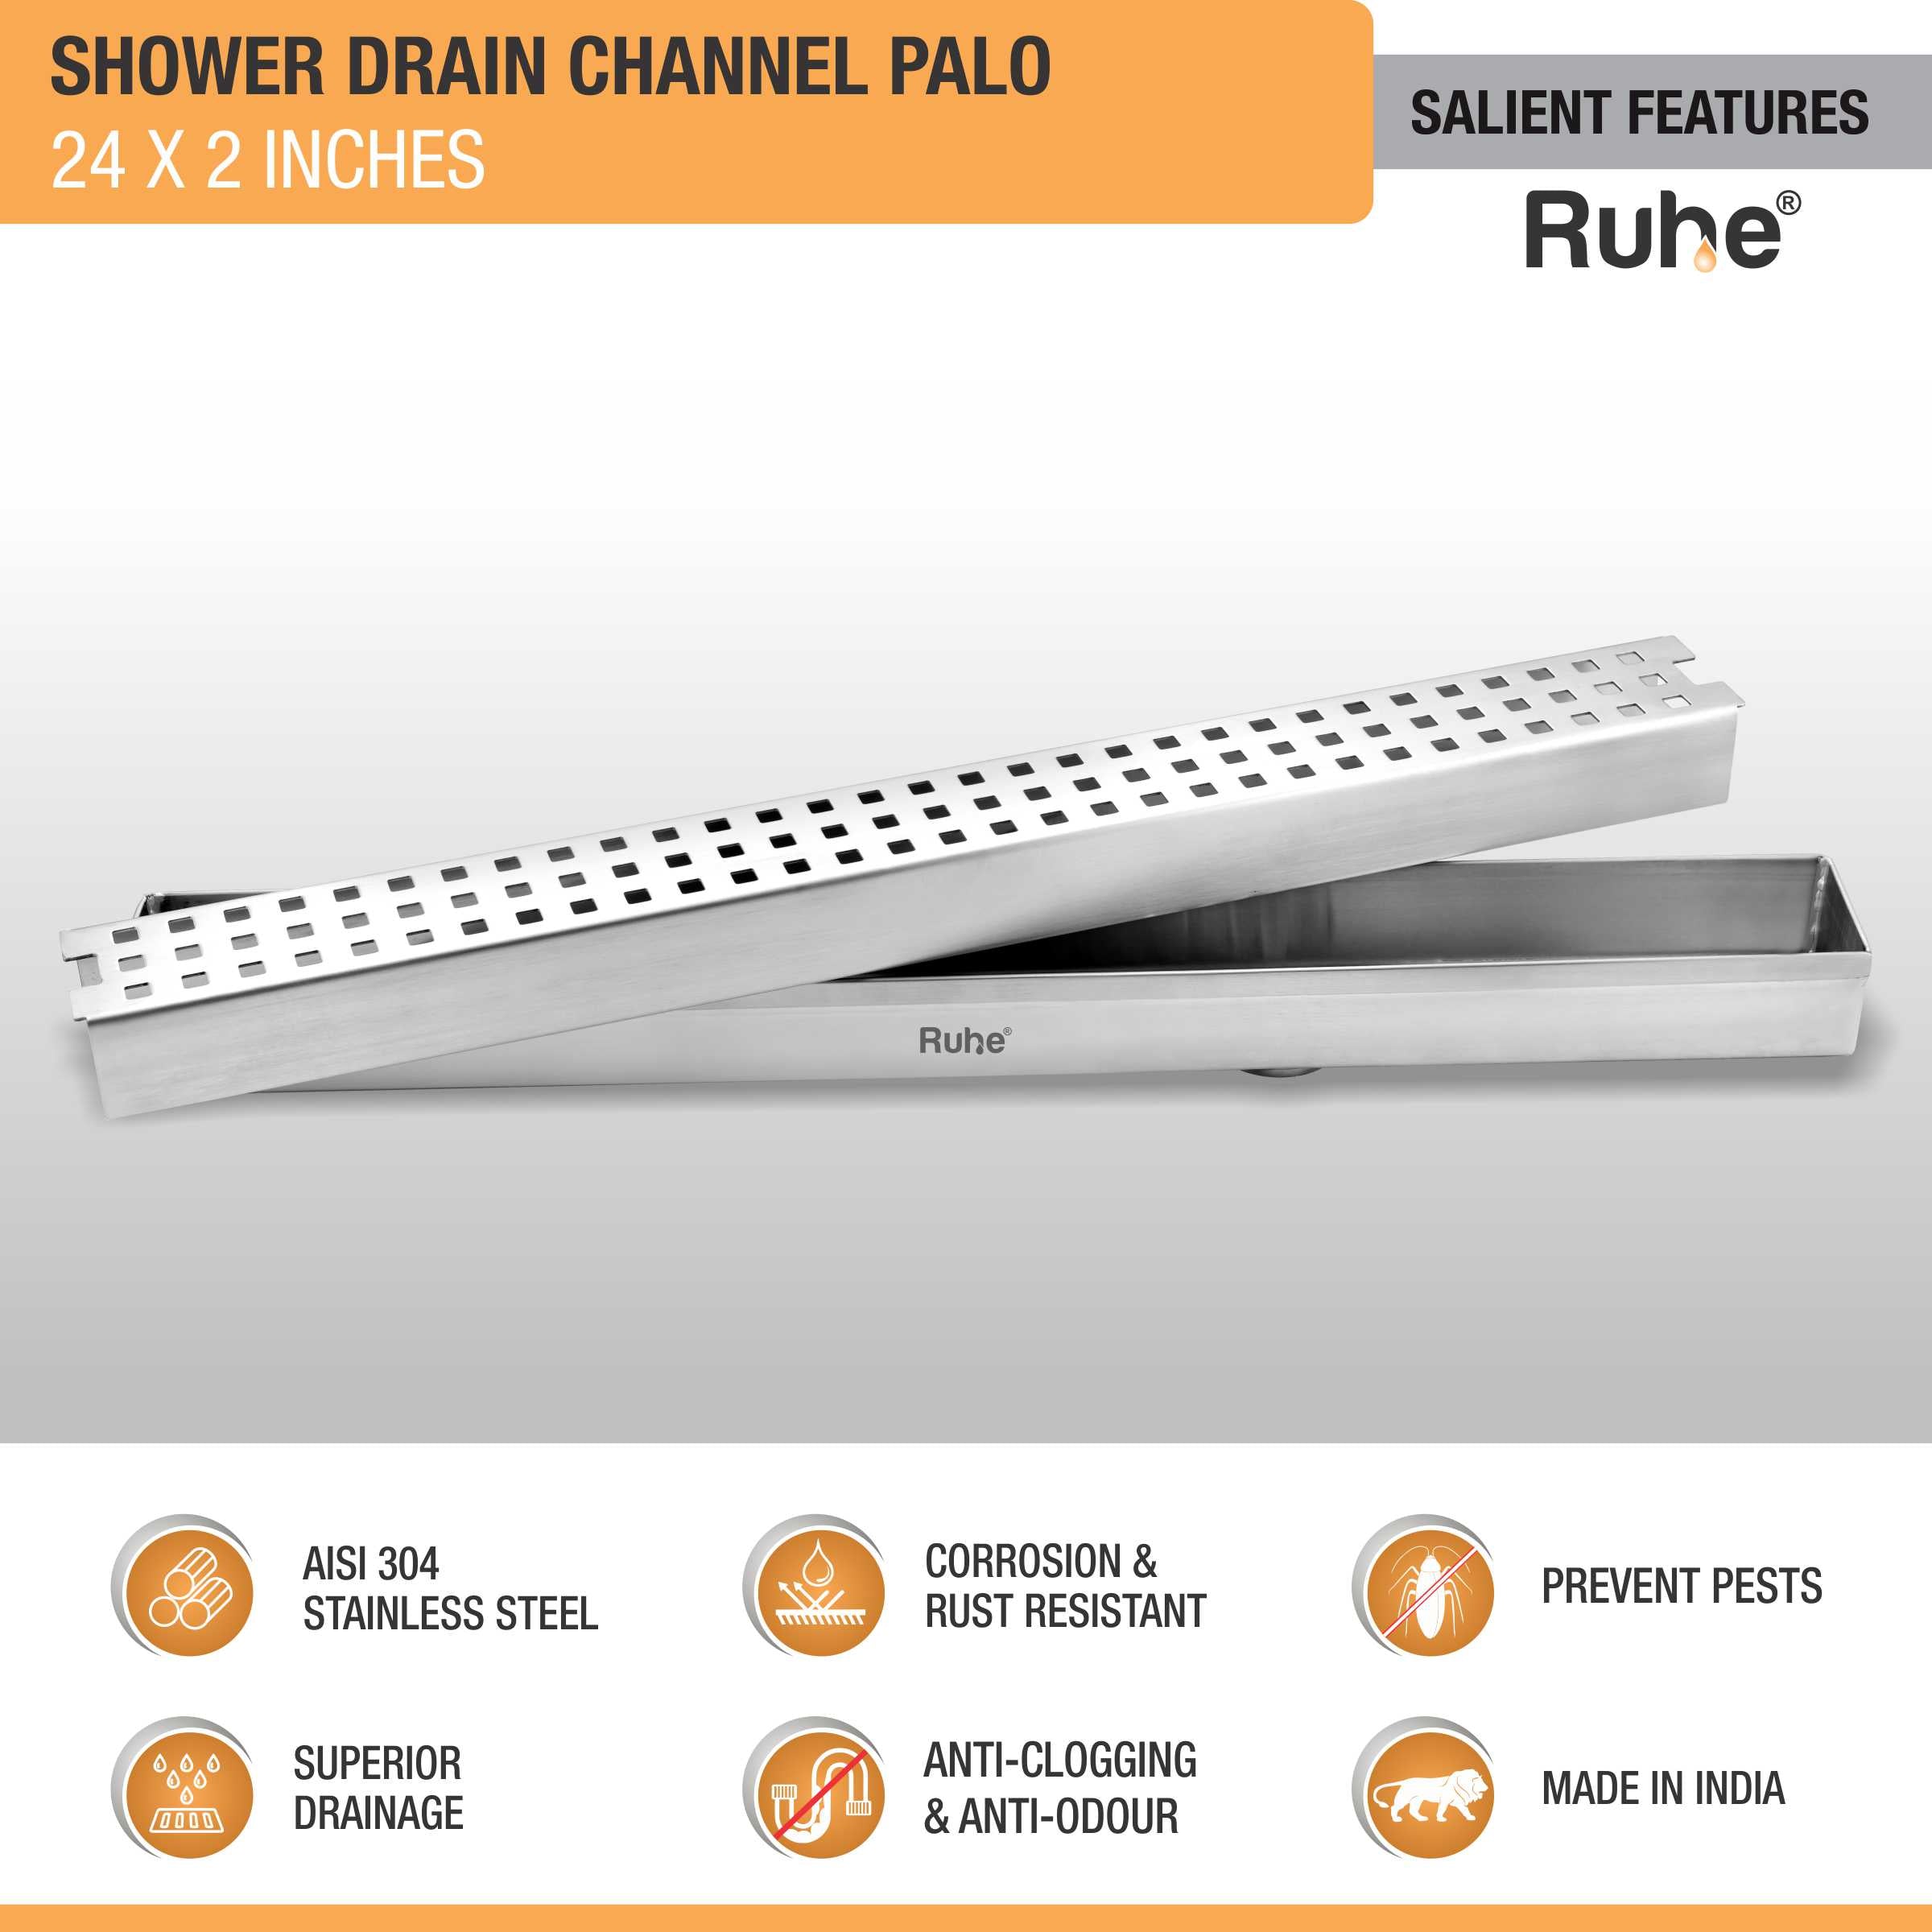 Palo Shower Drain Channel (24 X 2 Inches) (304 Grade) features